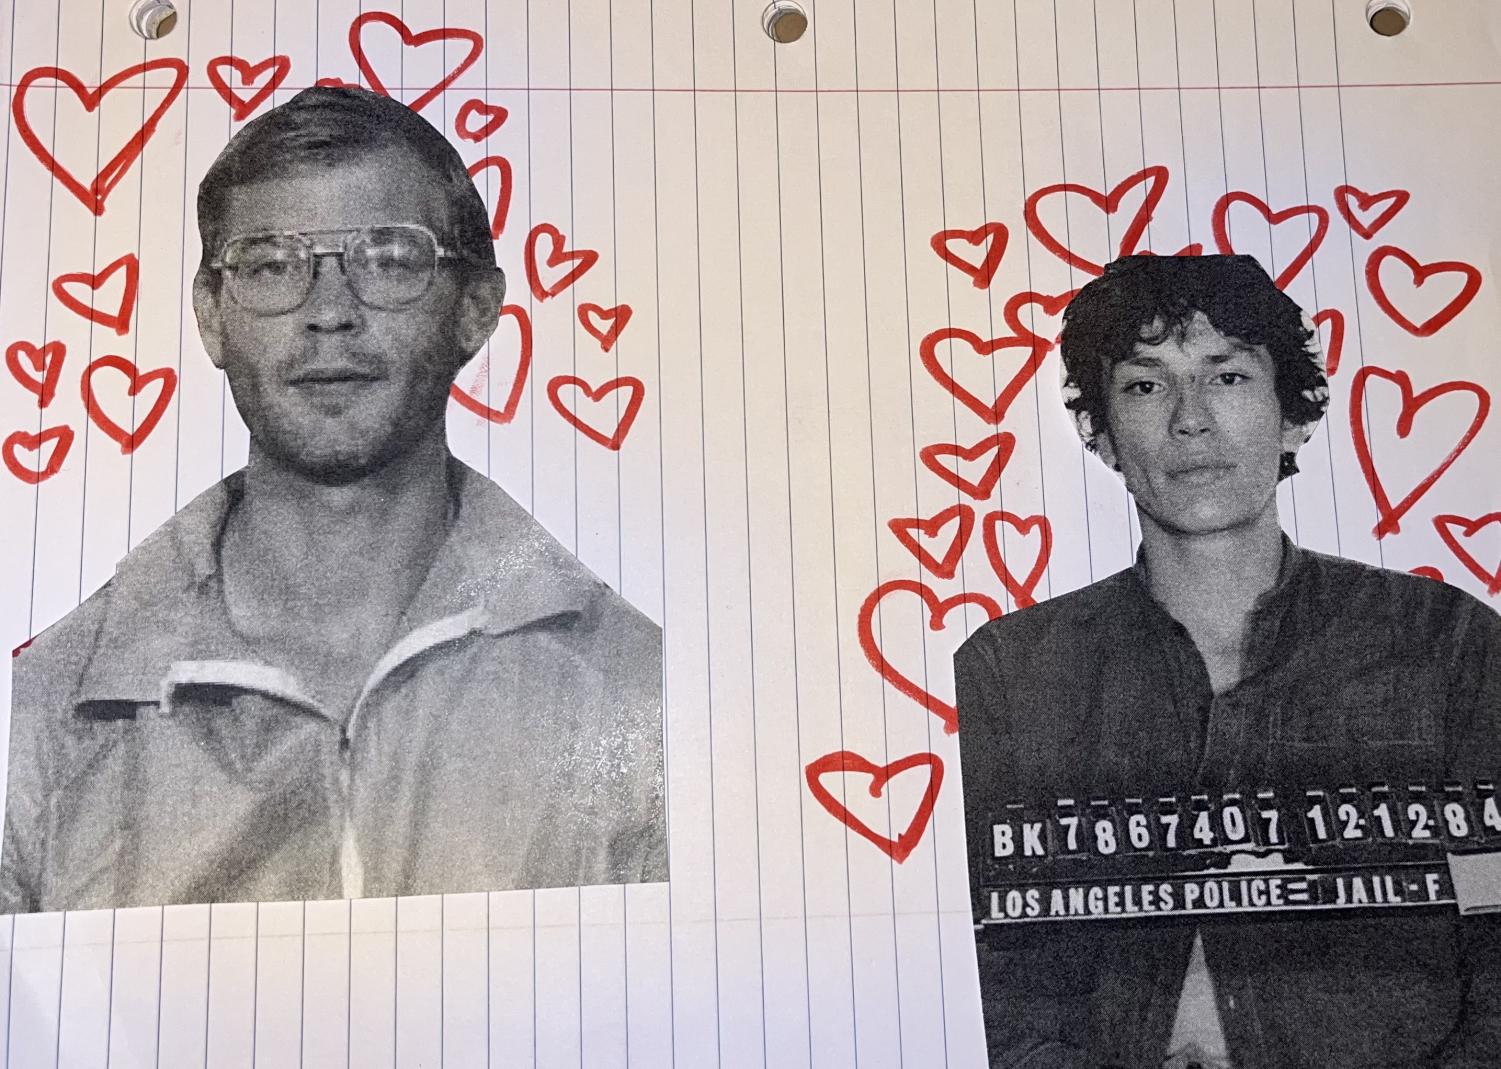 Collage made by Natalie Meschuk of Serial Killers being romanticized. (Photography by: Natalie Meschuk)